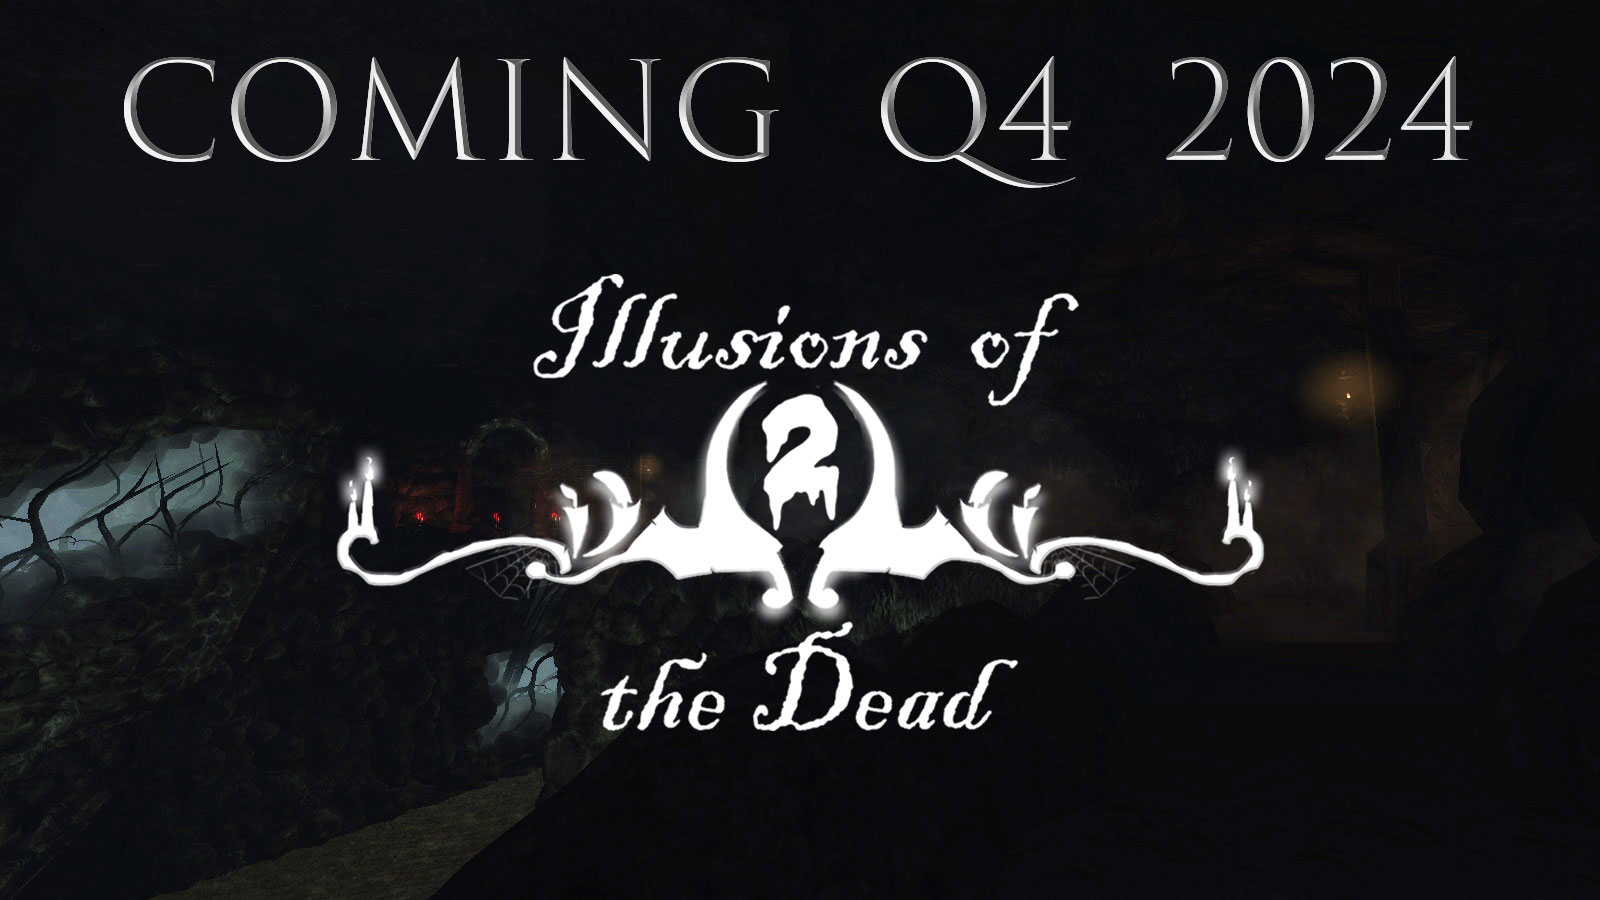 Illusions of the Dead 2 - Coming Q4 2024